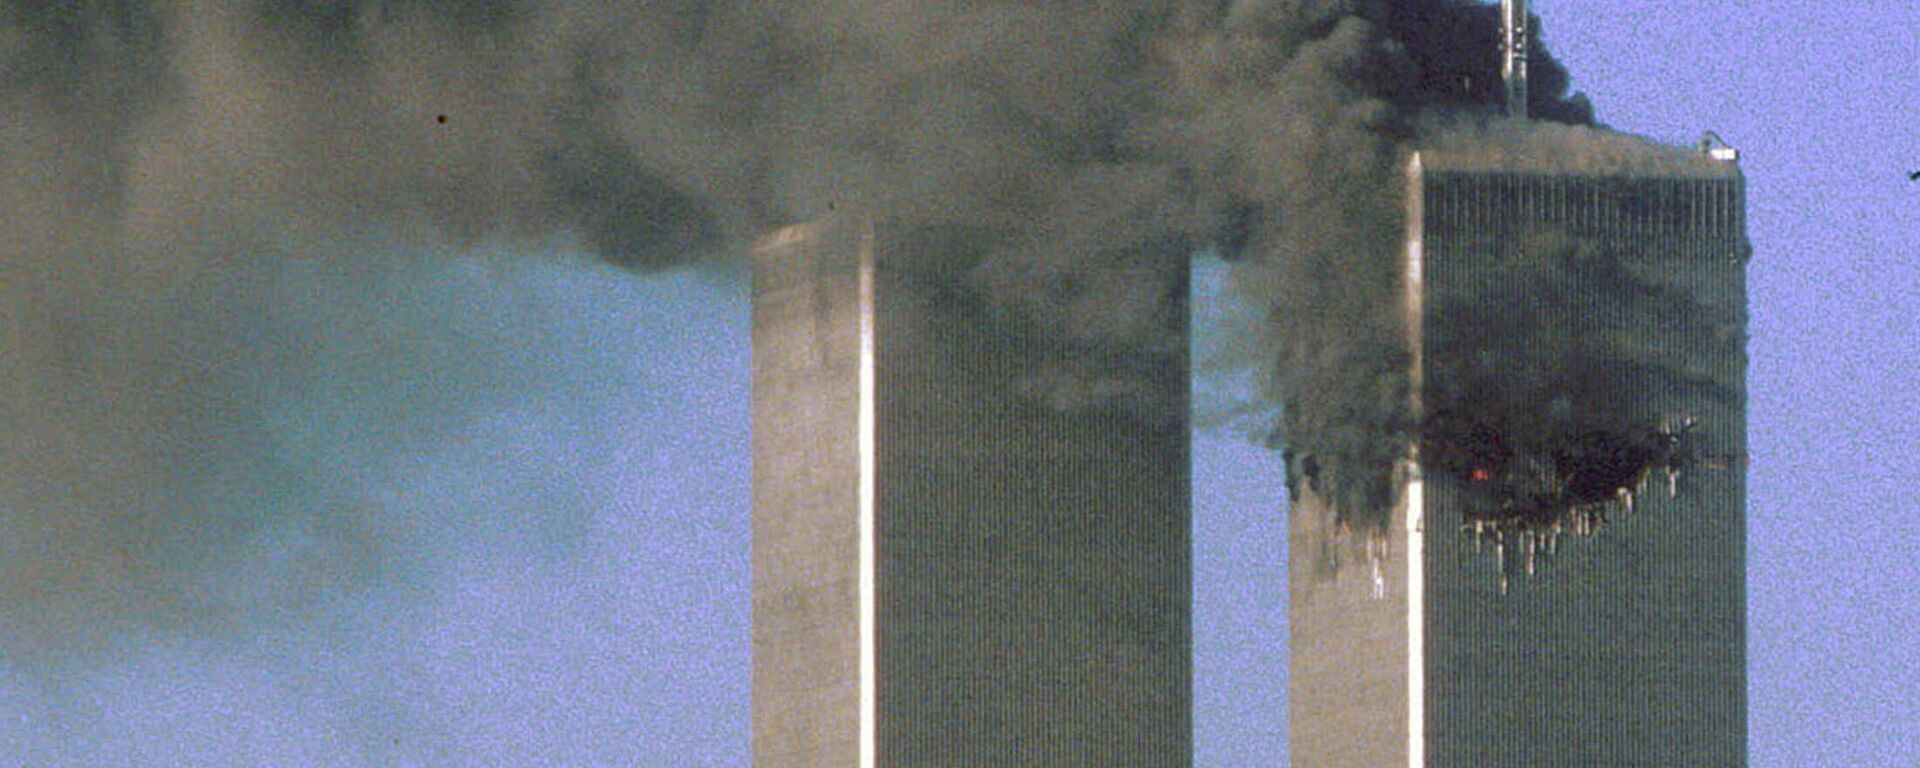 Hijacked United Airlines Flight 175 flies toward the World Trade Center twin towers shortly before slamming into the South tower (L), as the North tower burns, following an earlier attack by a hijacked airliner in New York, U.S., September 11, 2001 - Sputnik International, 1920, 11.09.2021